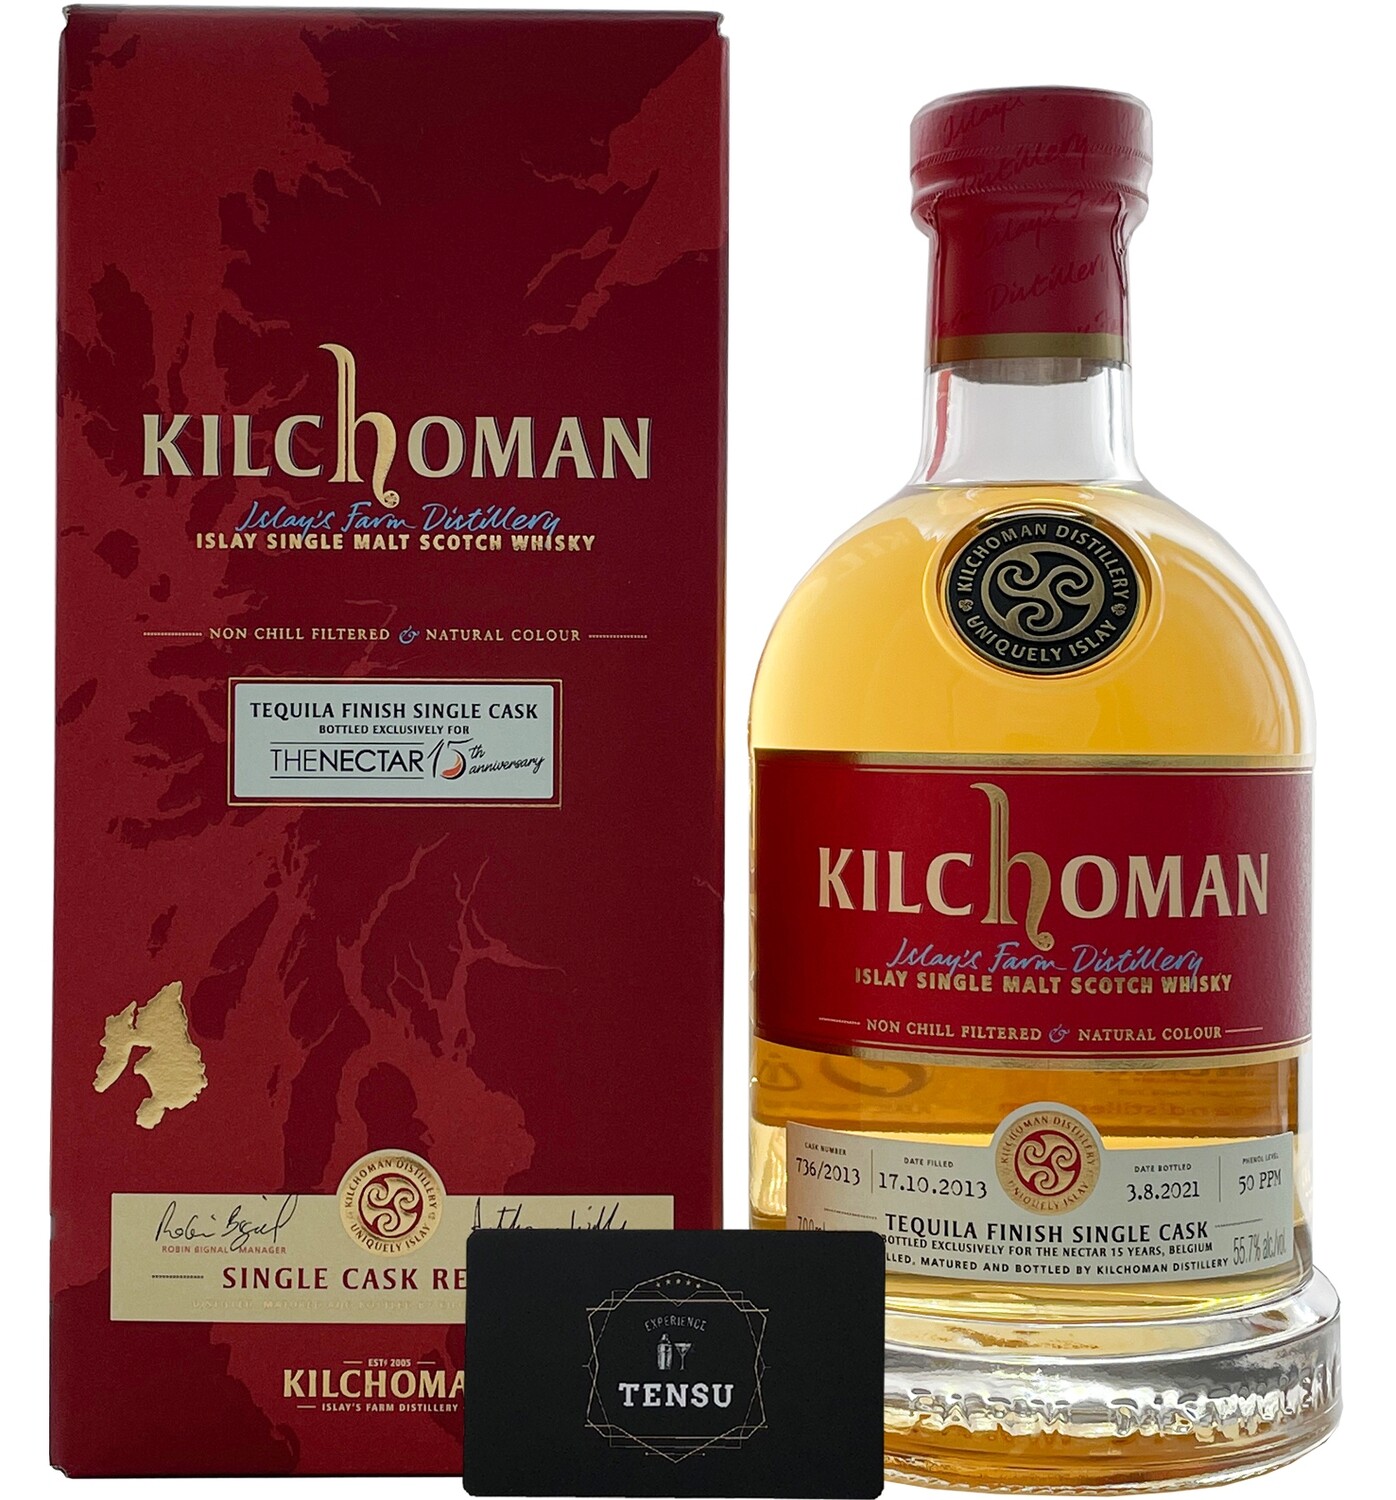 Kilchoman 7Y Tequila Finish (2013-2021) 55.7 "For The Nectar"